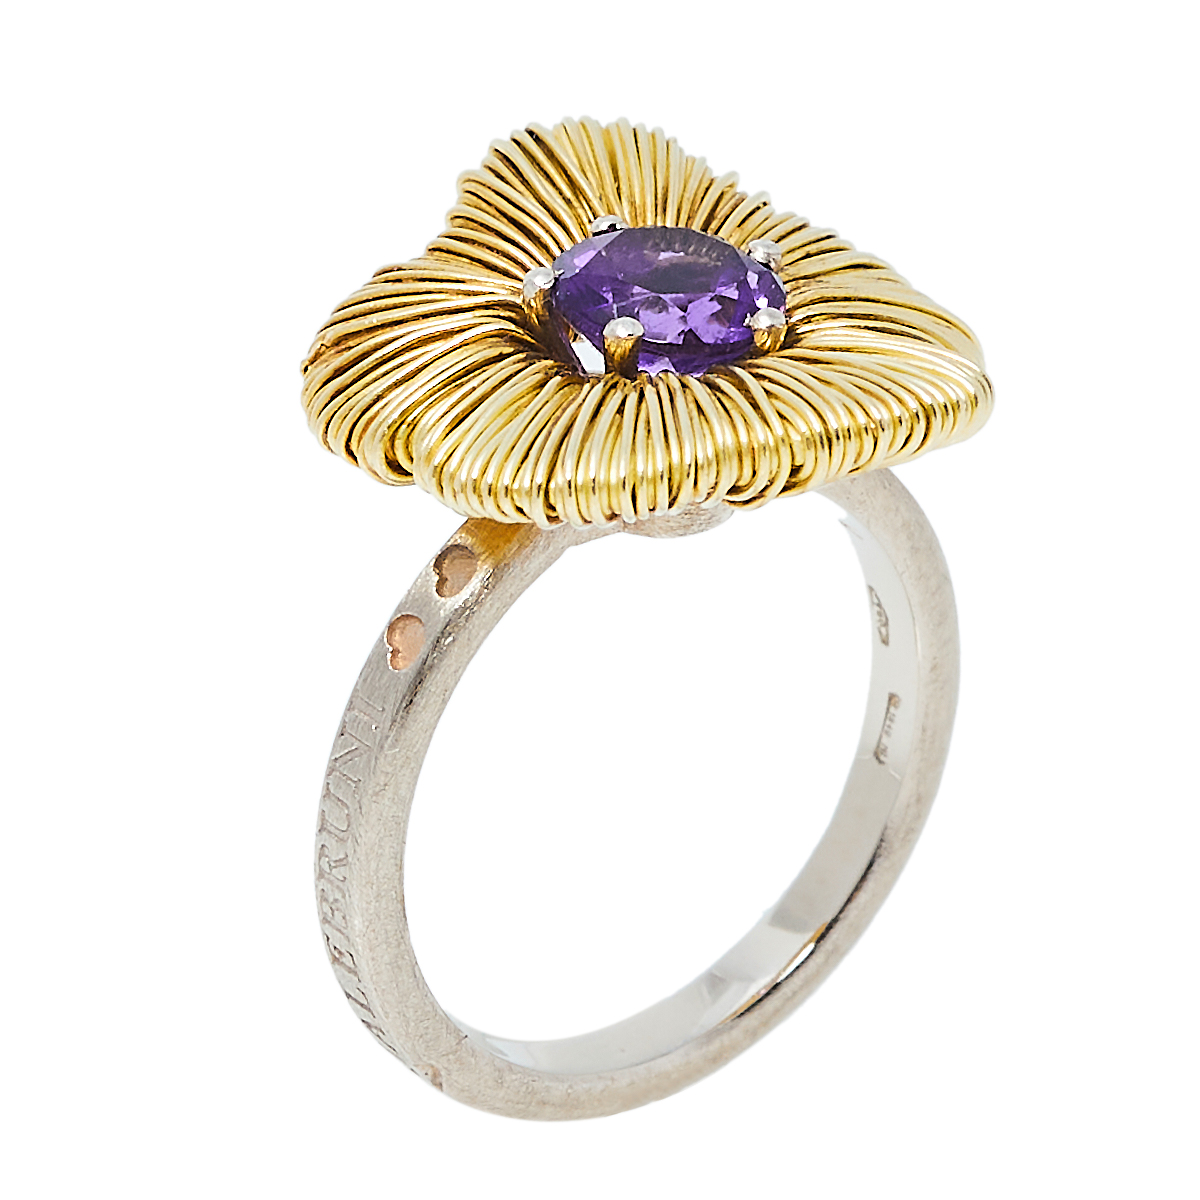 Pasquale Bruni Penelope Amethyst 18K Two Tone Gold Flower Ring Size 53